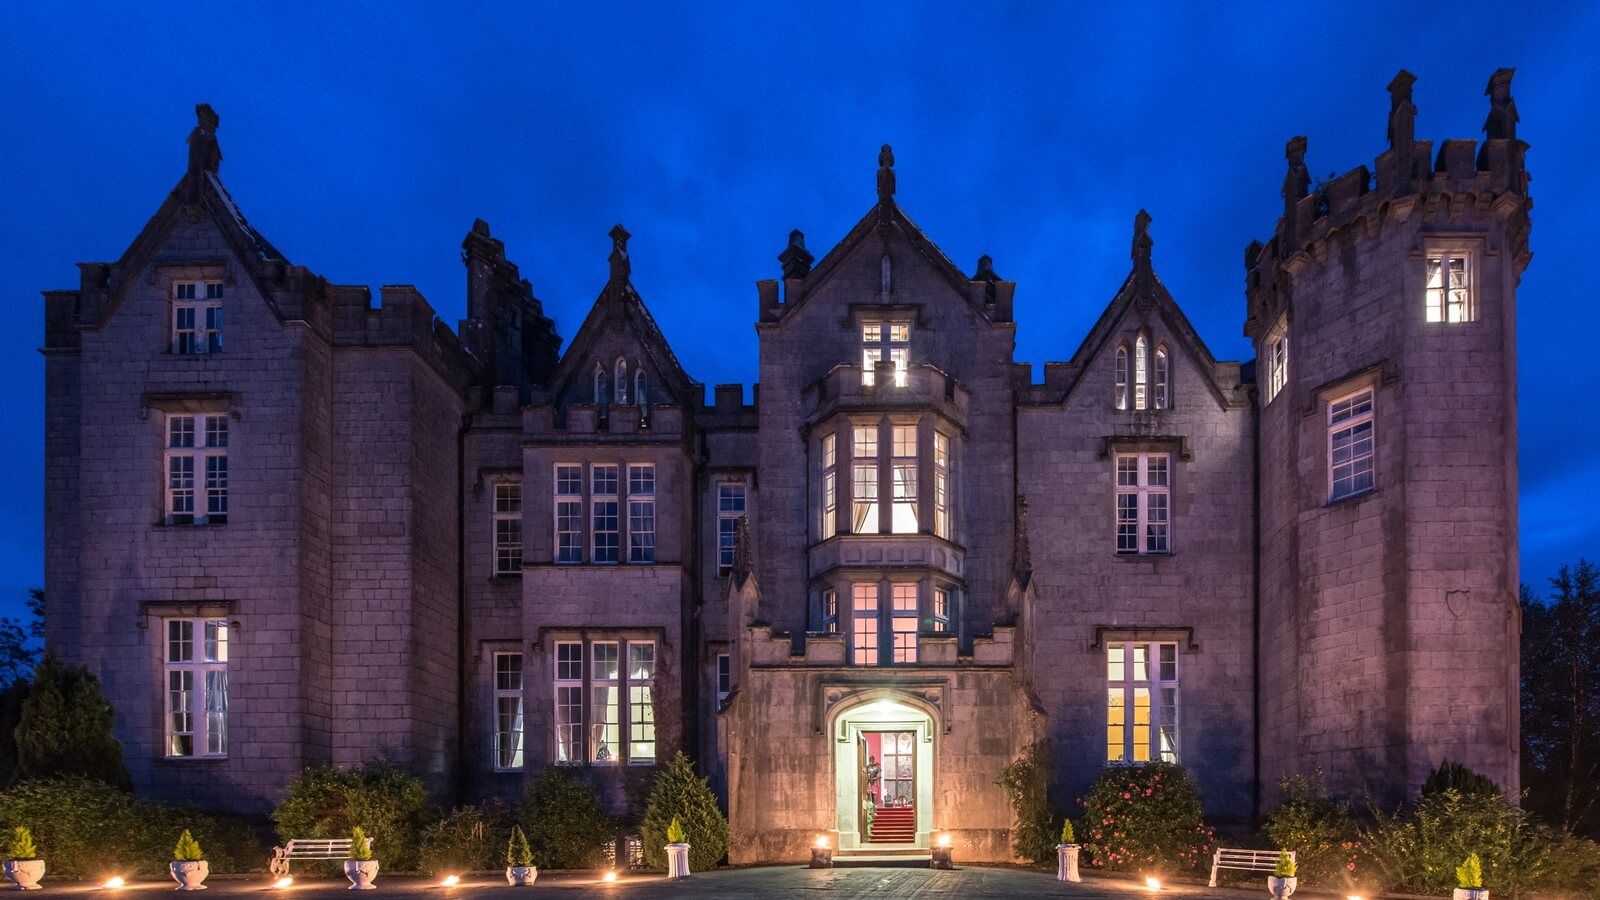 The 10 best hotels & places to stay in Birr, Ireland - Birr hotels